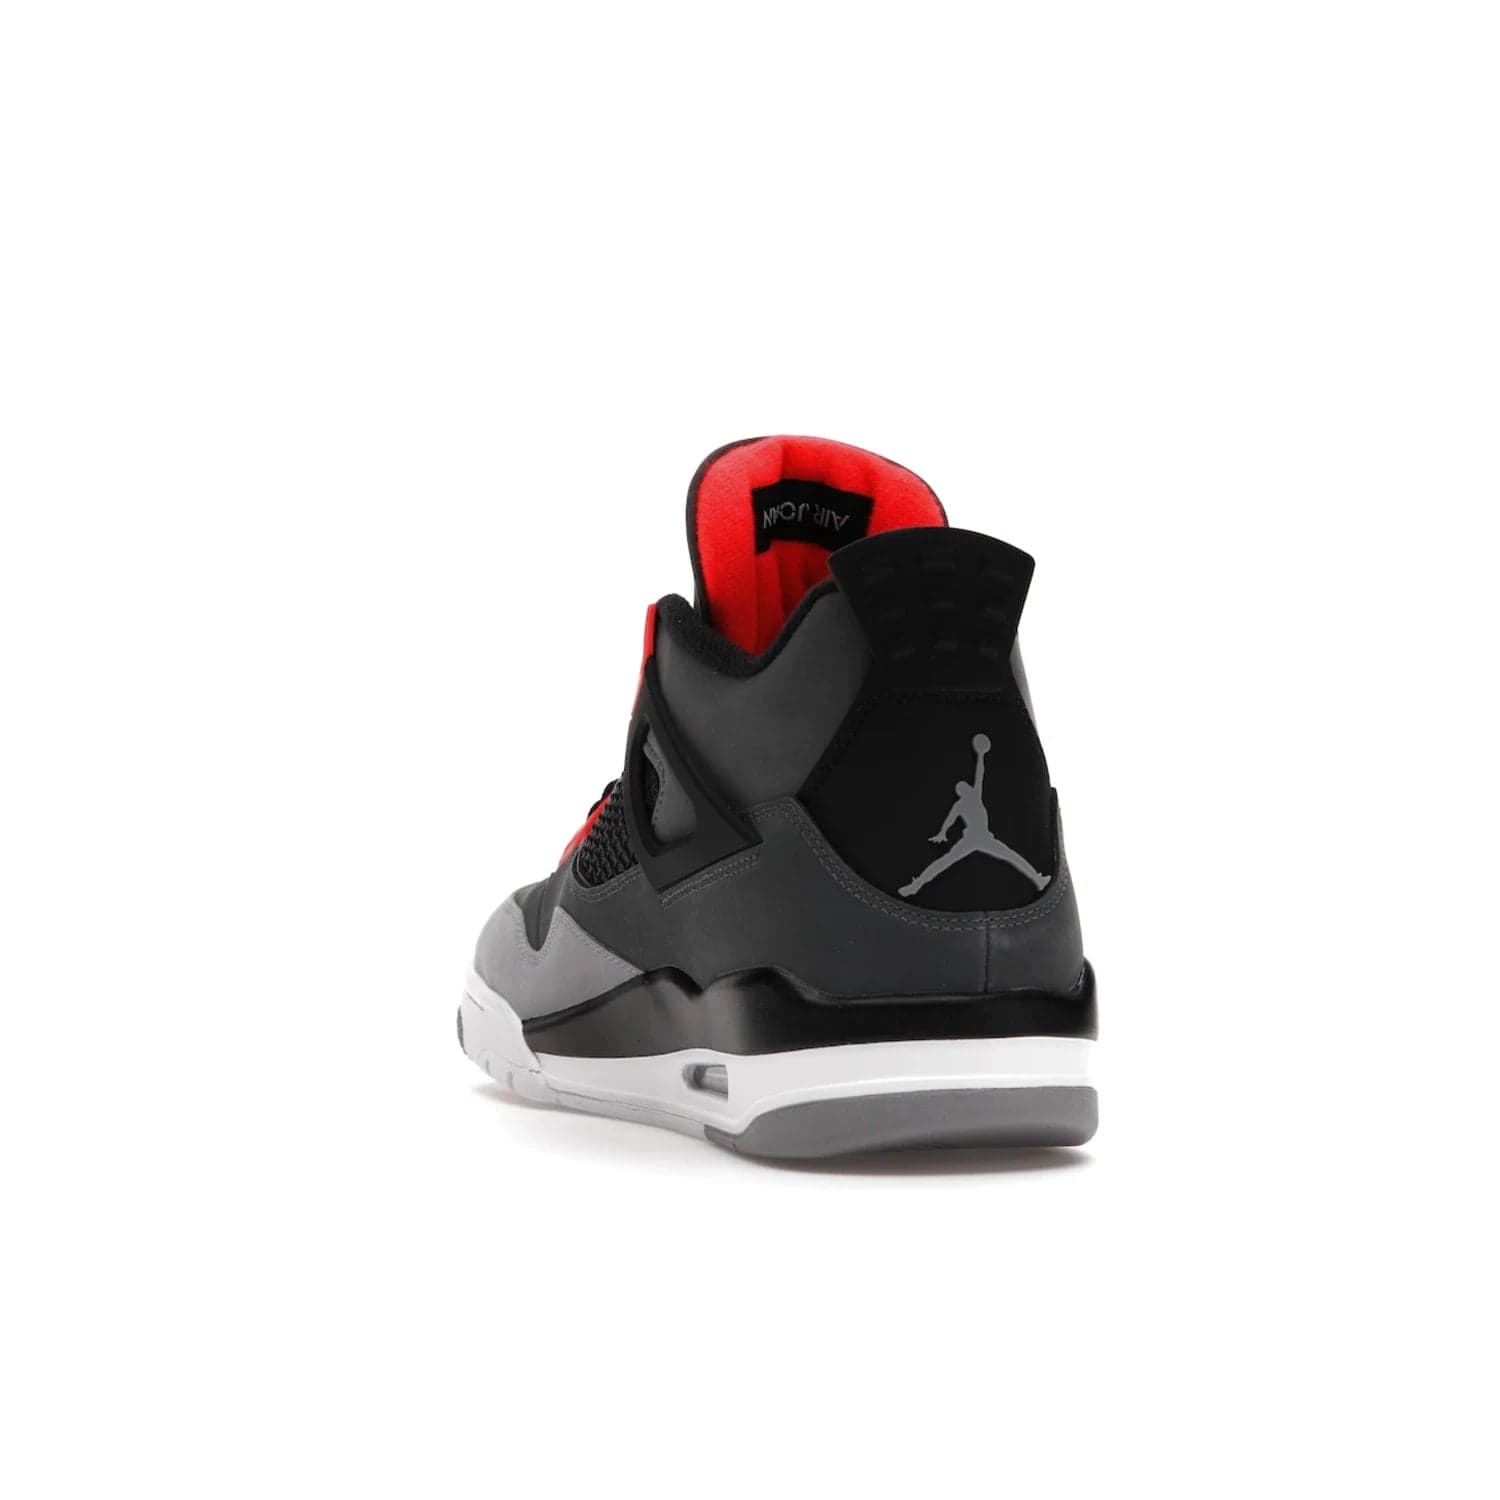 Jordan 4 Retro Infrared - Image 26 - Only at www.BallersClubKickz.com - Introducing the classic & timeless Air Jordan 4 Infrared. Durabuck upper, TPU mesh inserts, tech straps & heel tabs in dark grey and infrared accents. White sole with visible Air units. Out June 15, 2022. Get your pair now!